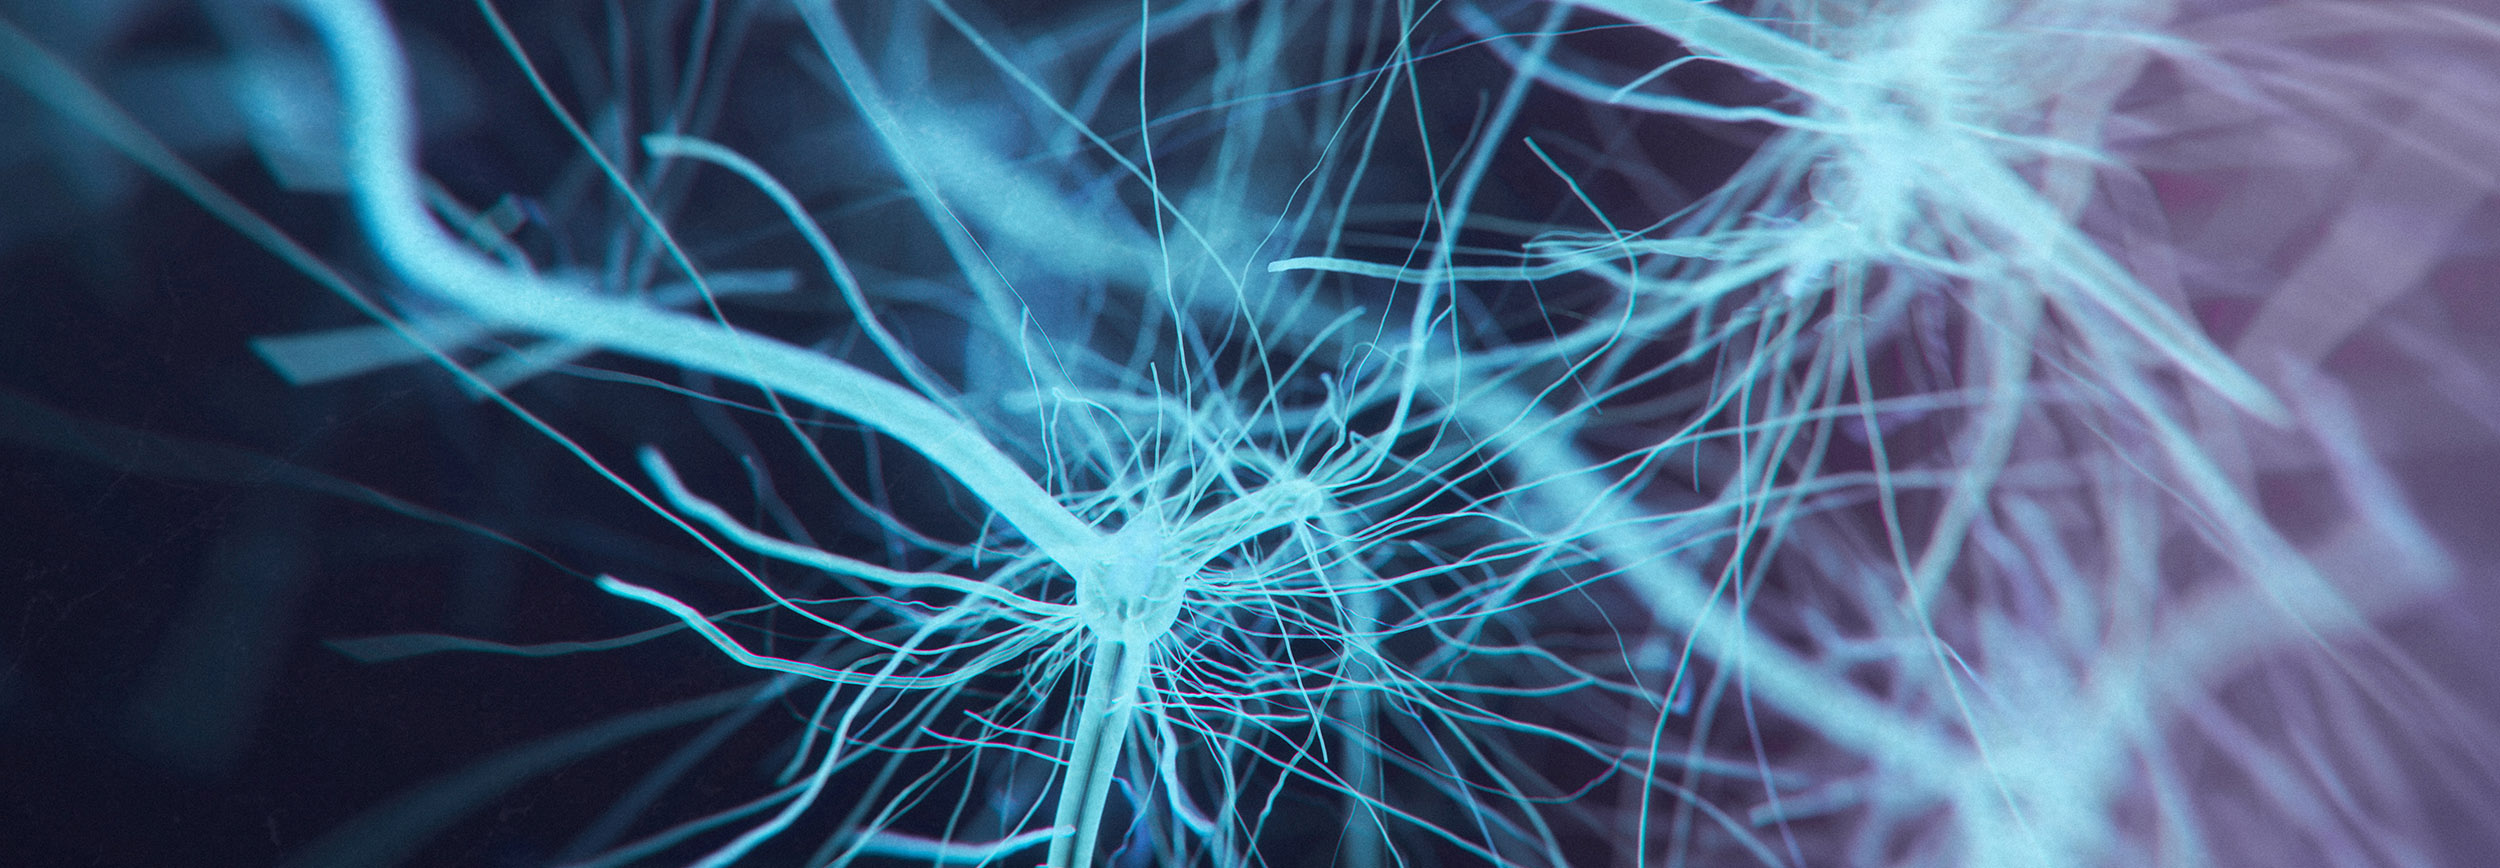 stock image of neurons